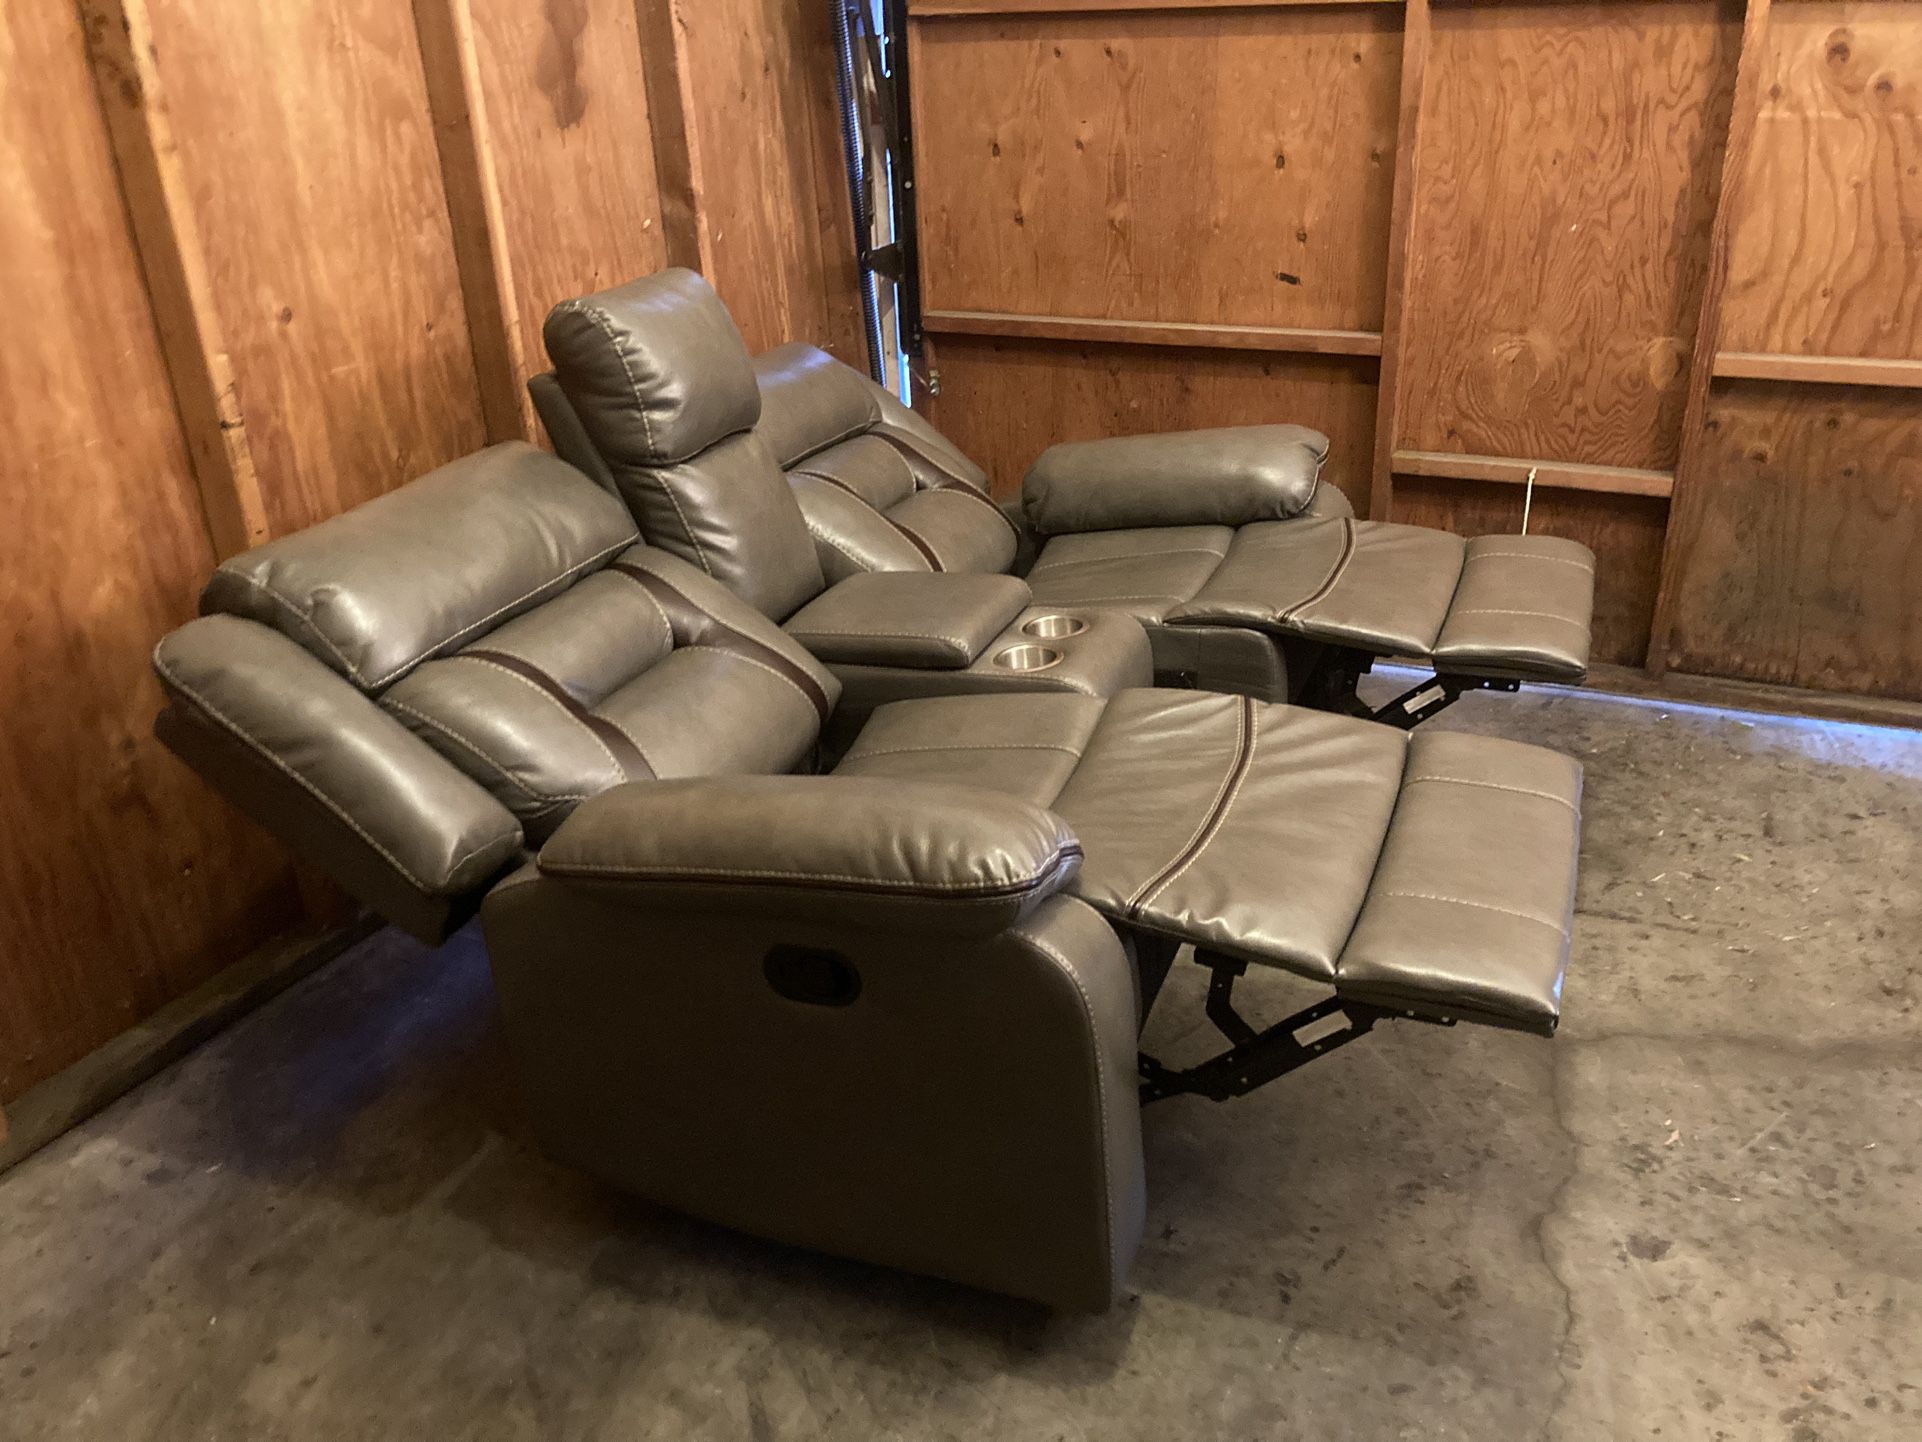 Recliner Loveseat Couch - Free Delivery 